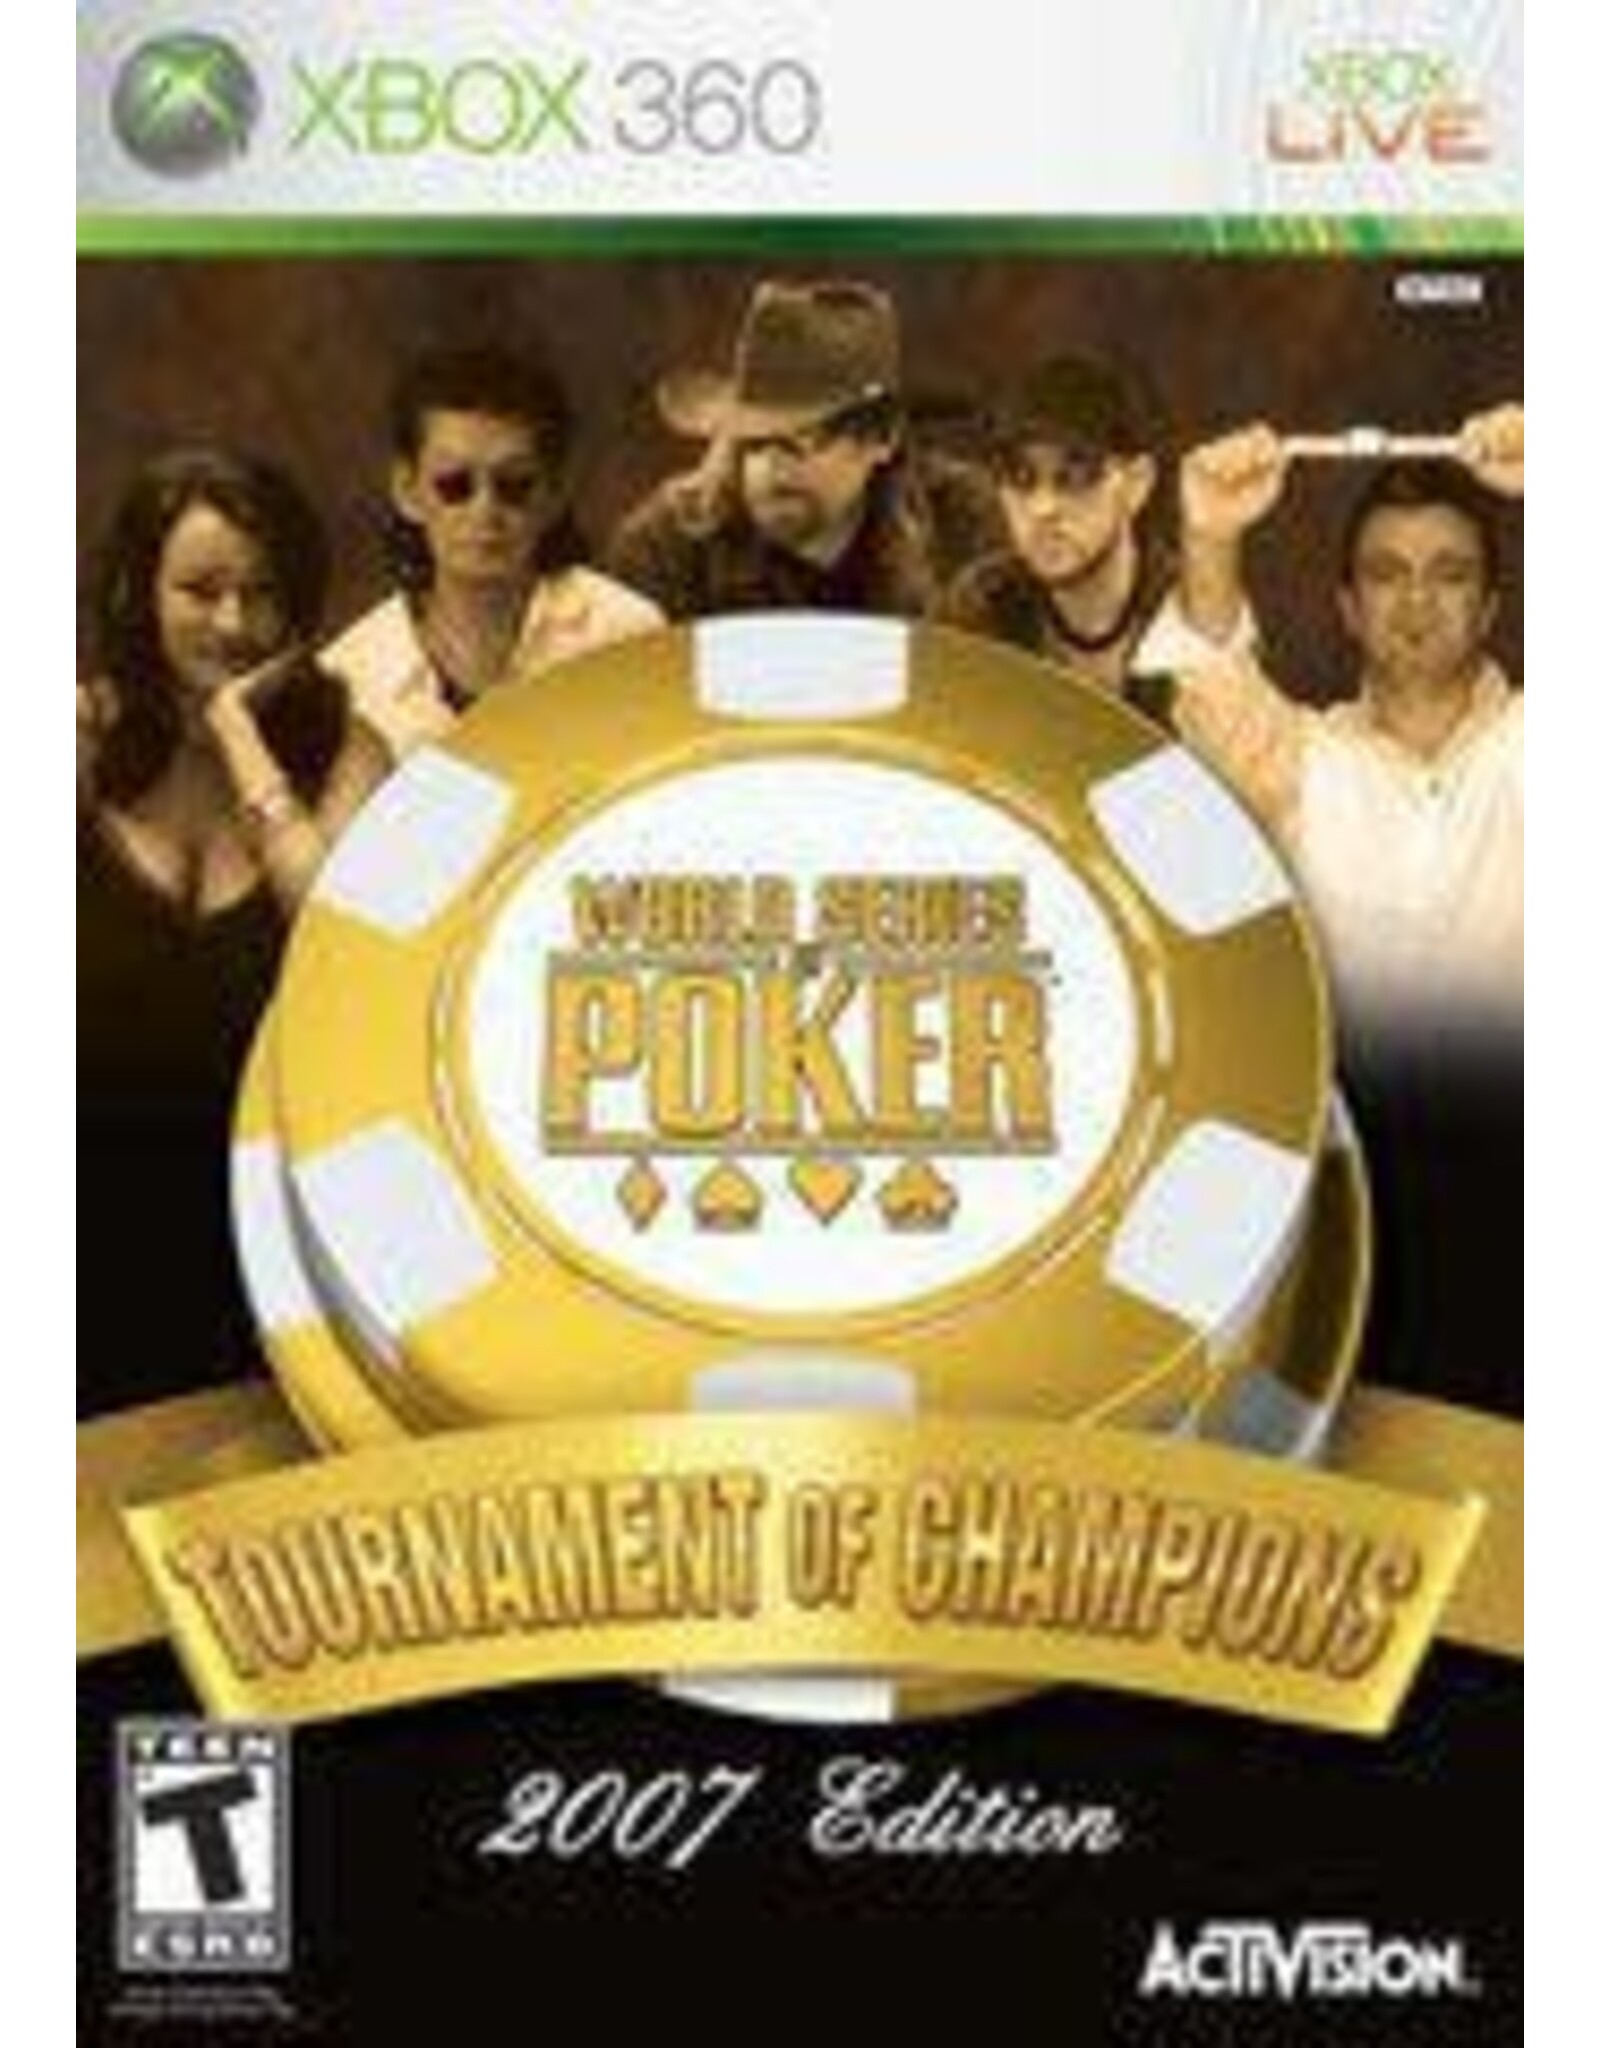 Xbox 360 World Series of Poker Tournament of Champions 2007 (Used, Cosmetic Damage)